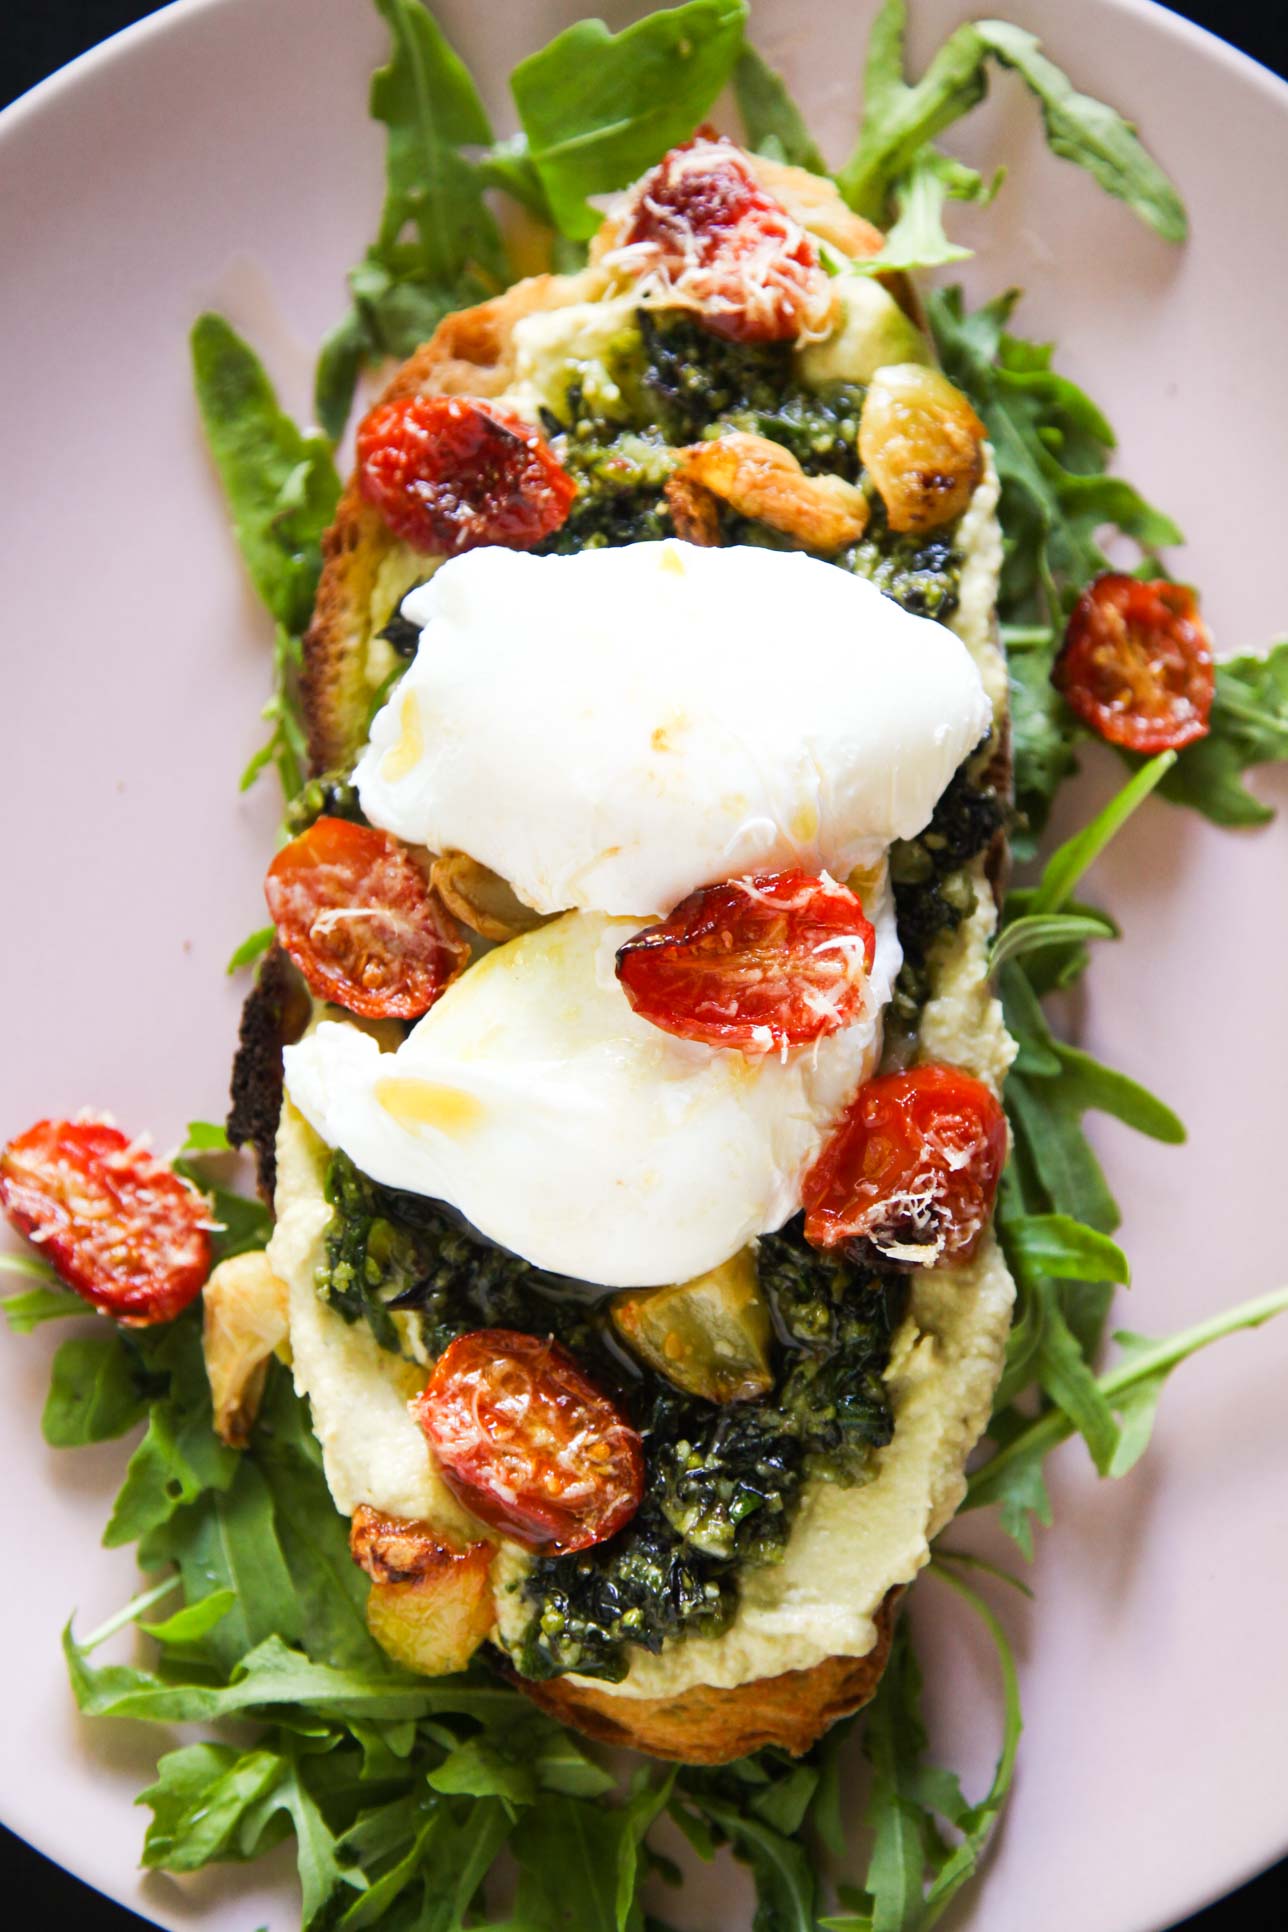 Delicious Umami Brunch with Oven Roasted Tomatoes, Hummus and Pesto | Berries and Spice